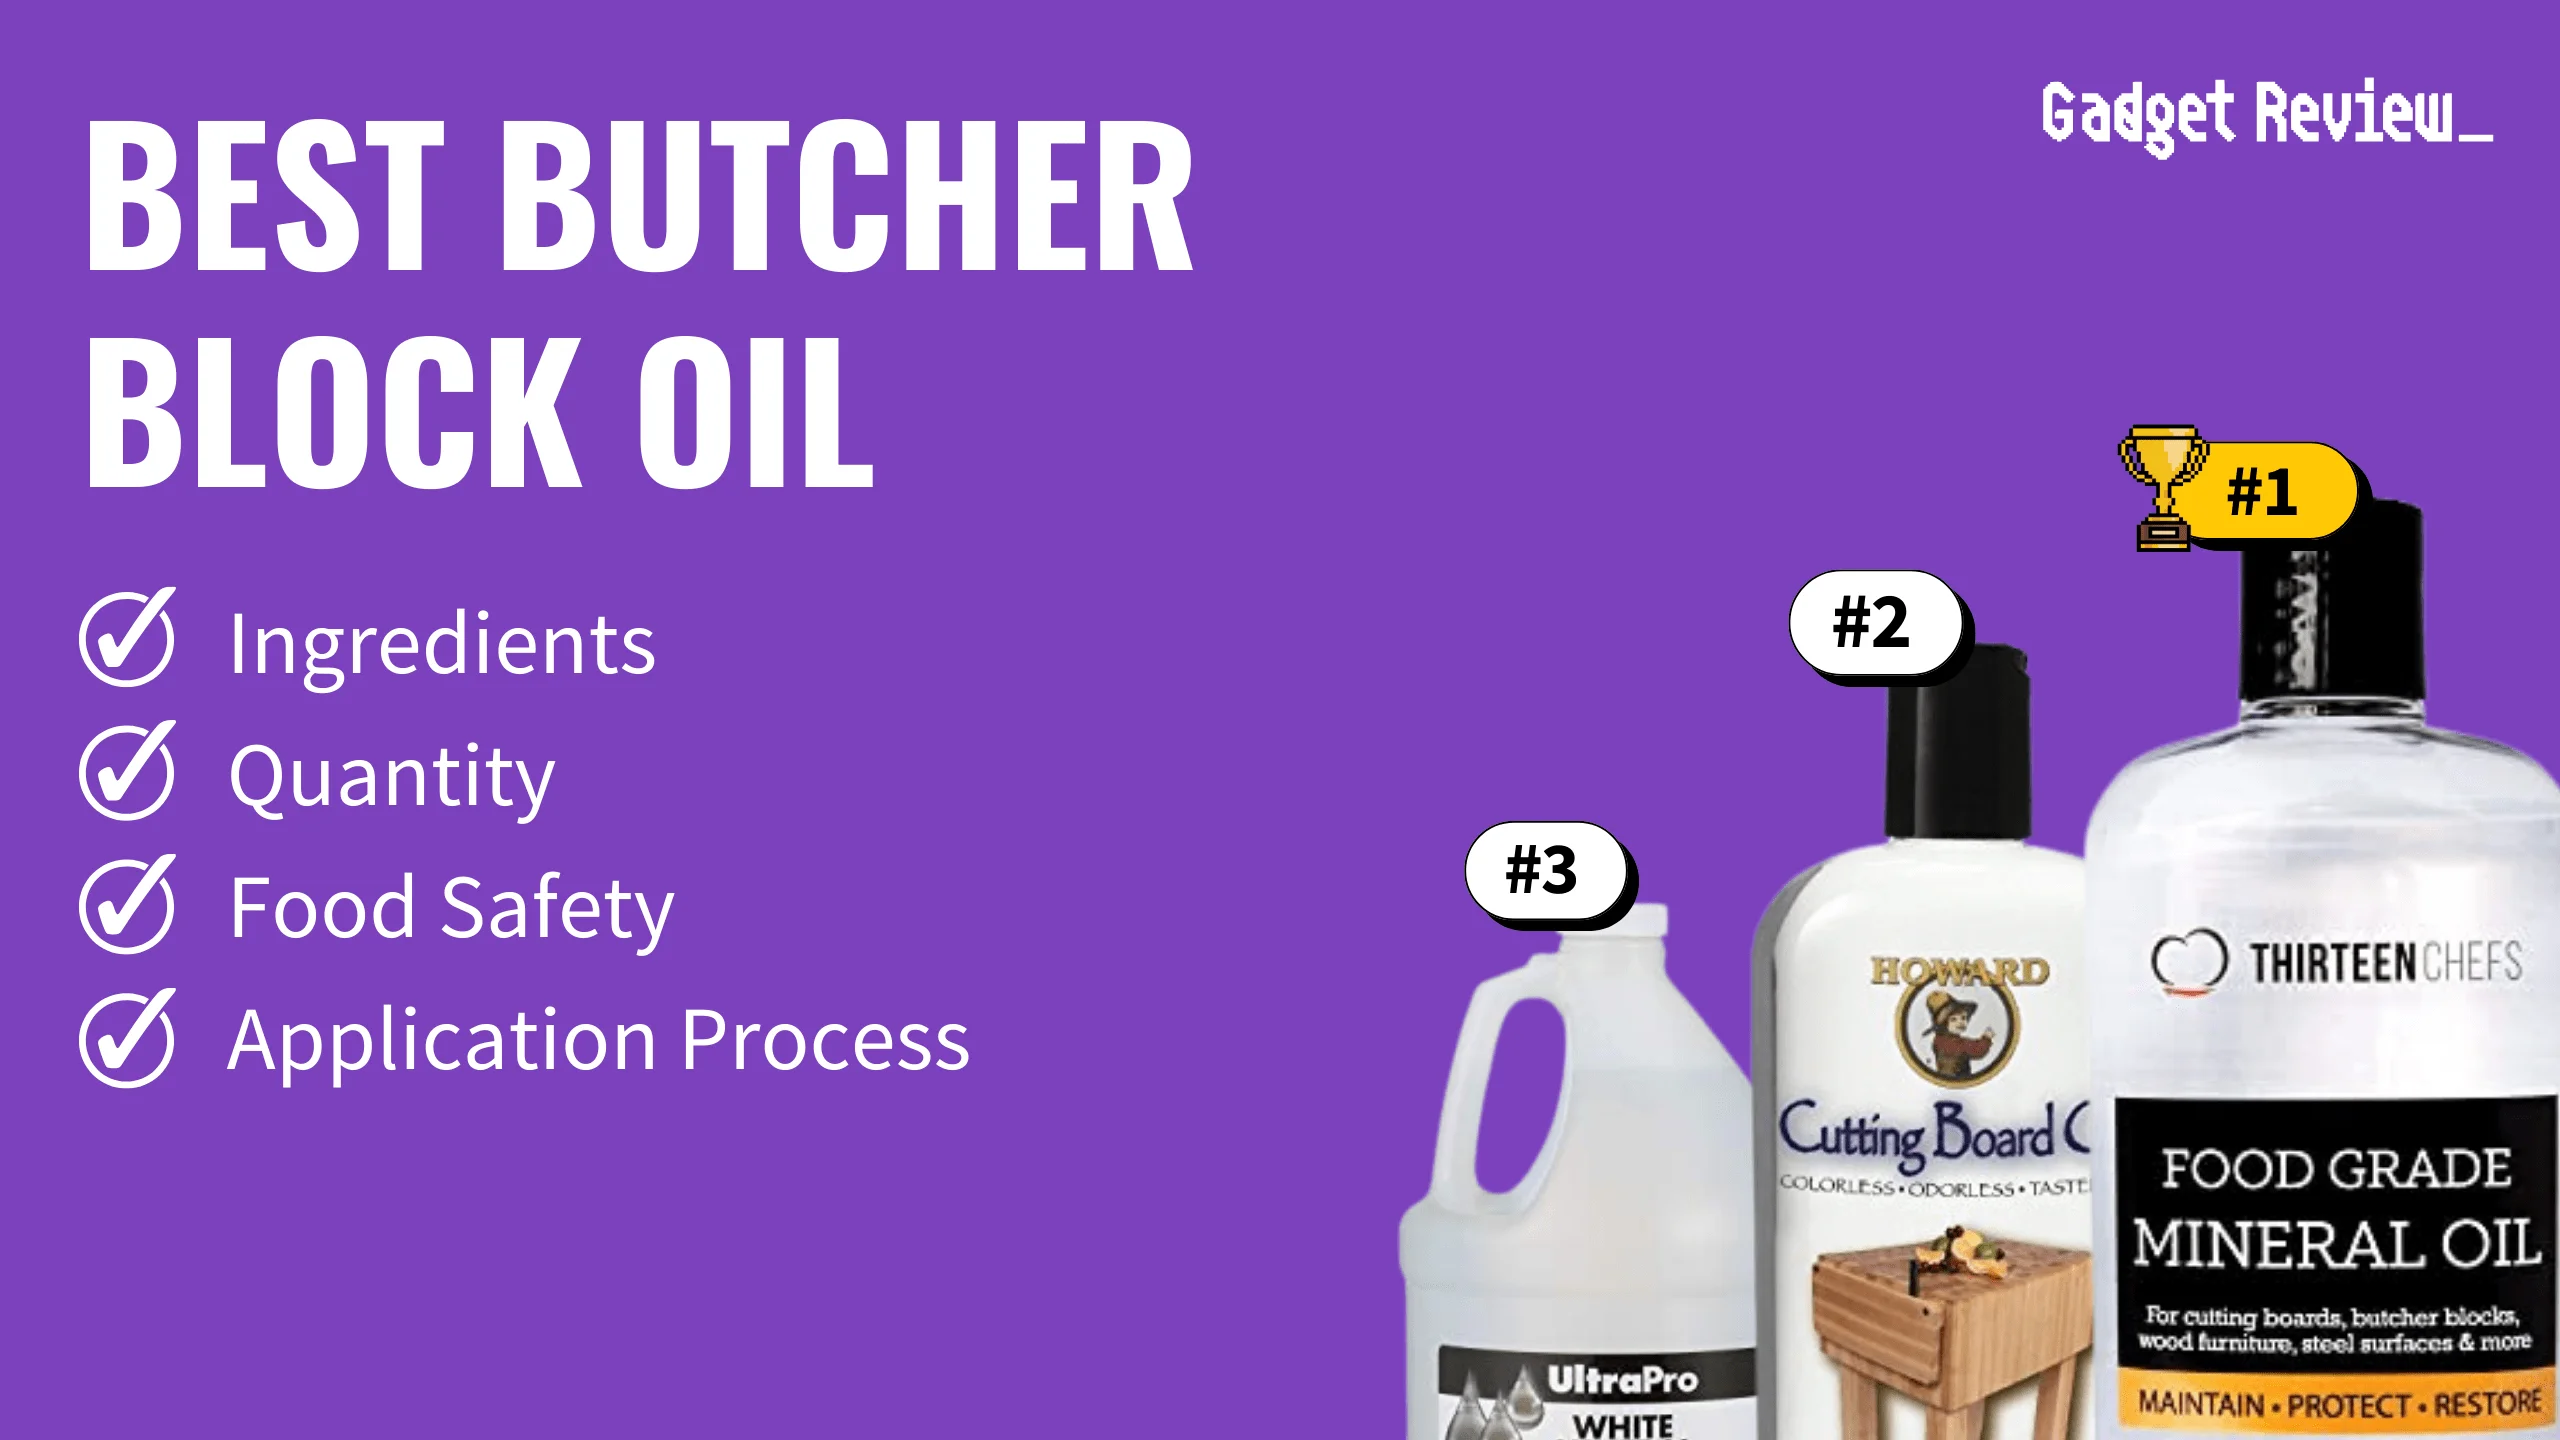 best butcher block oil featured image that shows the top three best kitchen product models